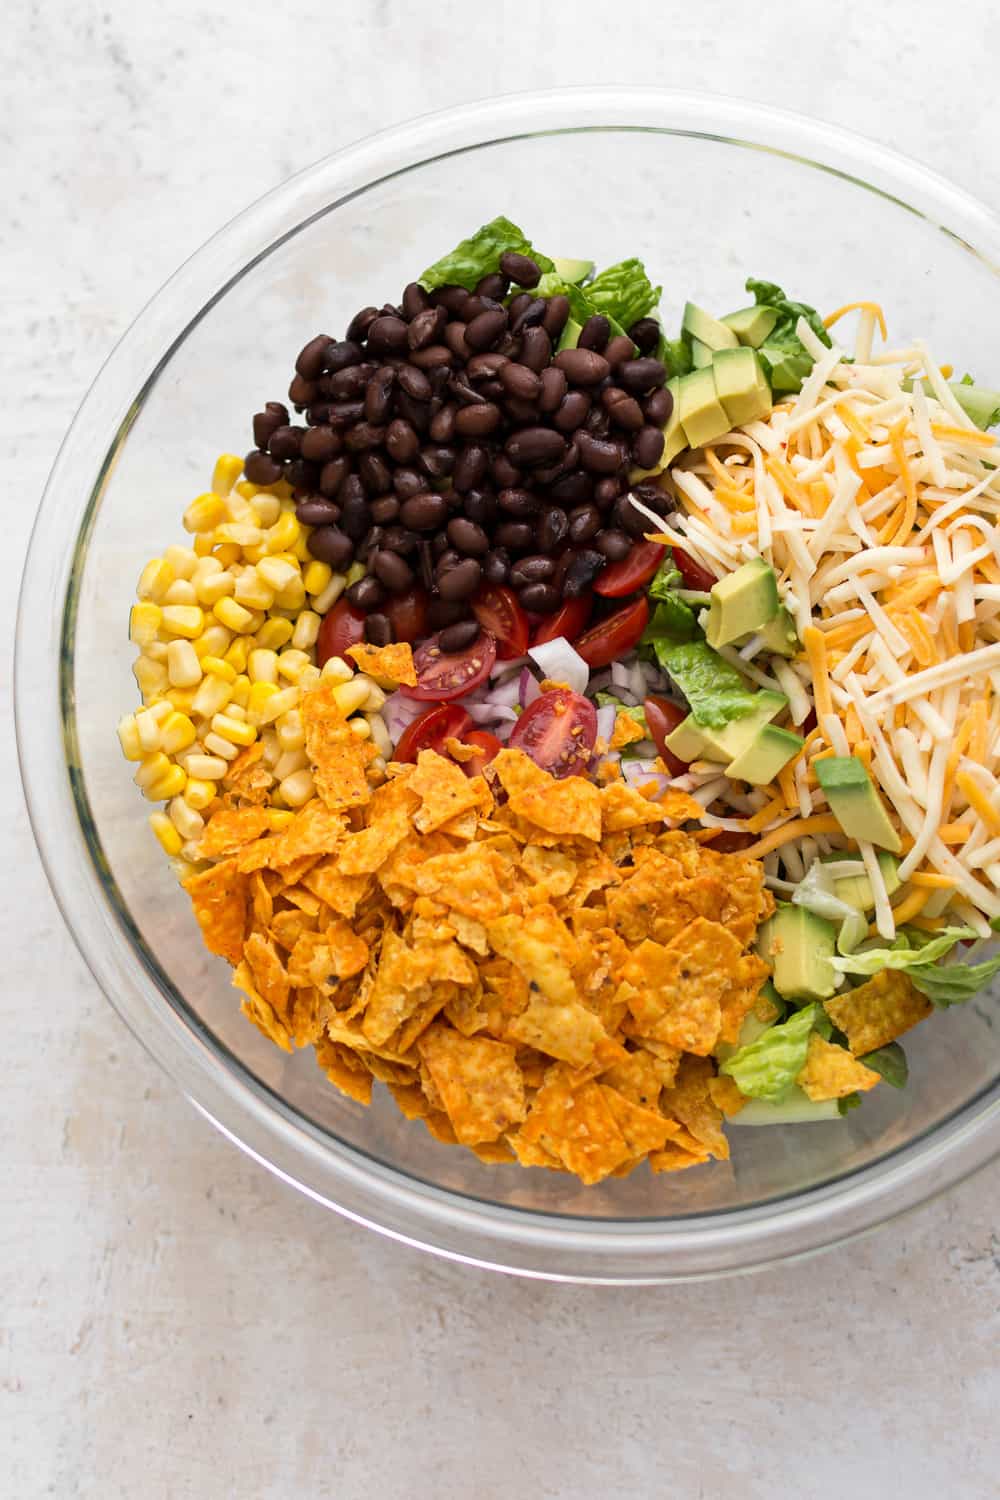 A colorful salad in a glass bowl with sections of black beans, chopped tomatoes, corn, crushed tortilla chips, diced avocado, shredded cheese, and lettuce on a white surface makes for easy dinner ideas